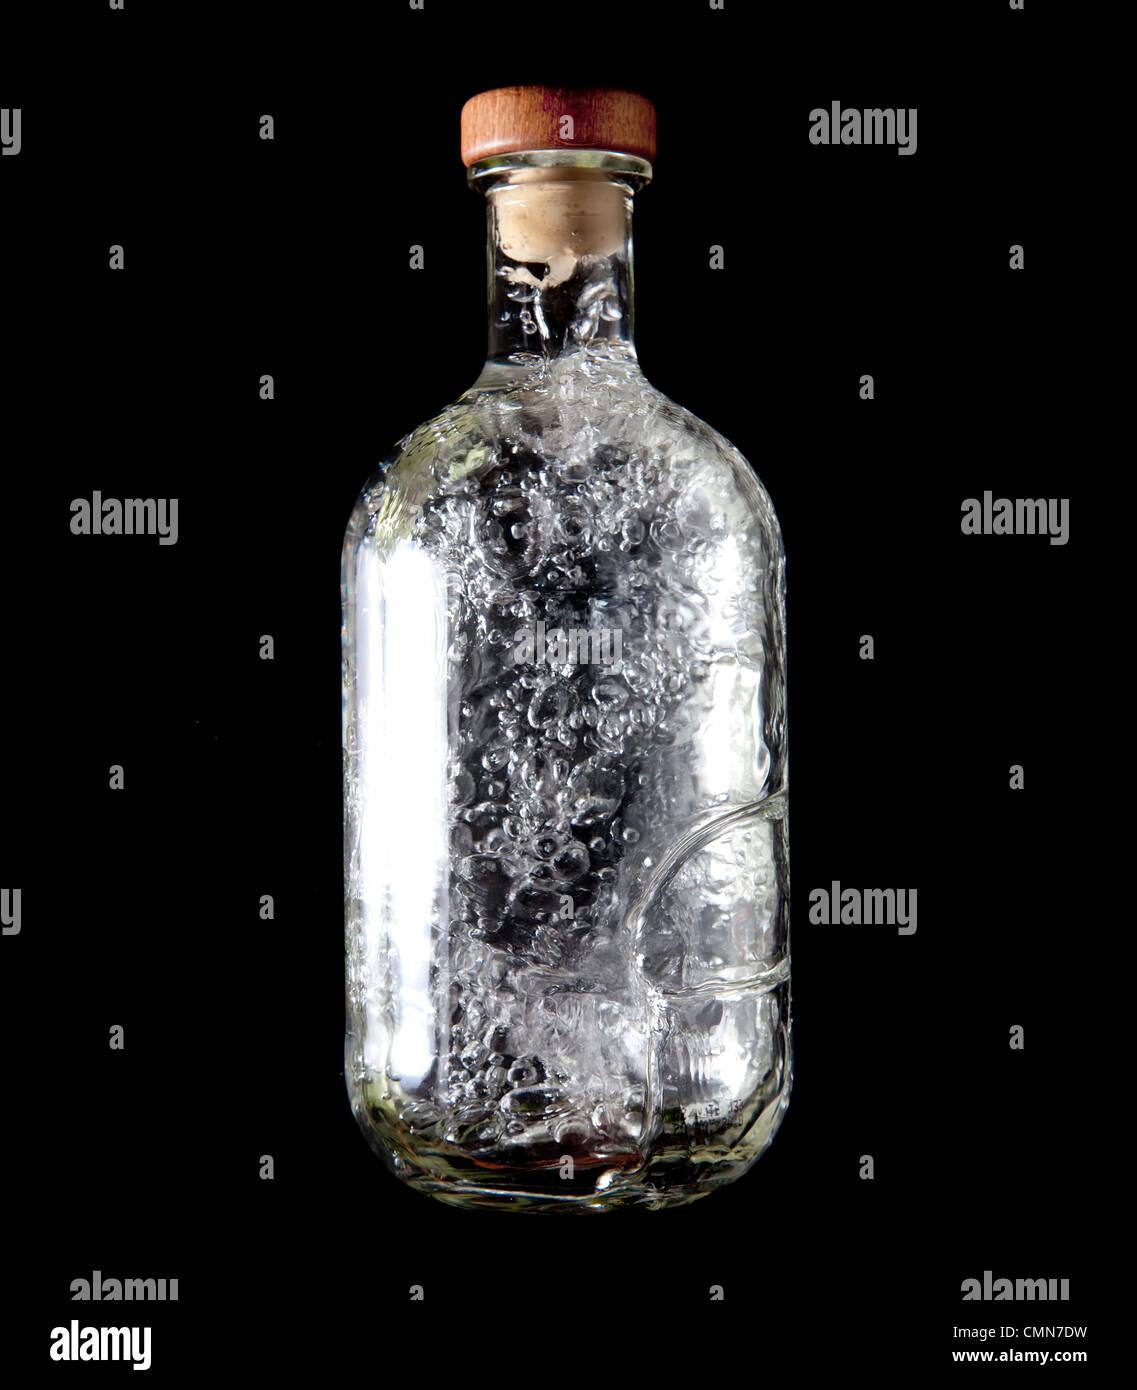 Glass bottle with cork top and bubbling liquid inside Stock Photo